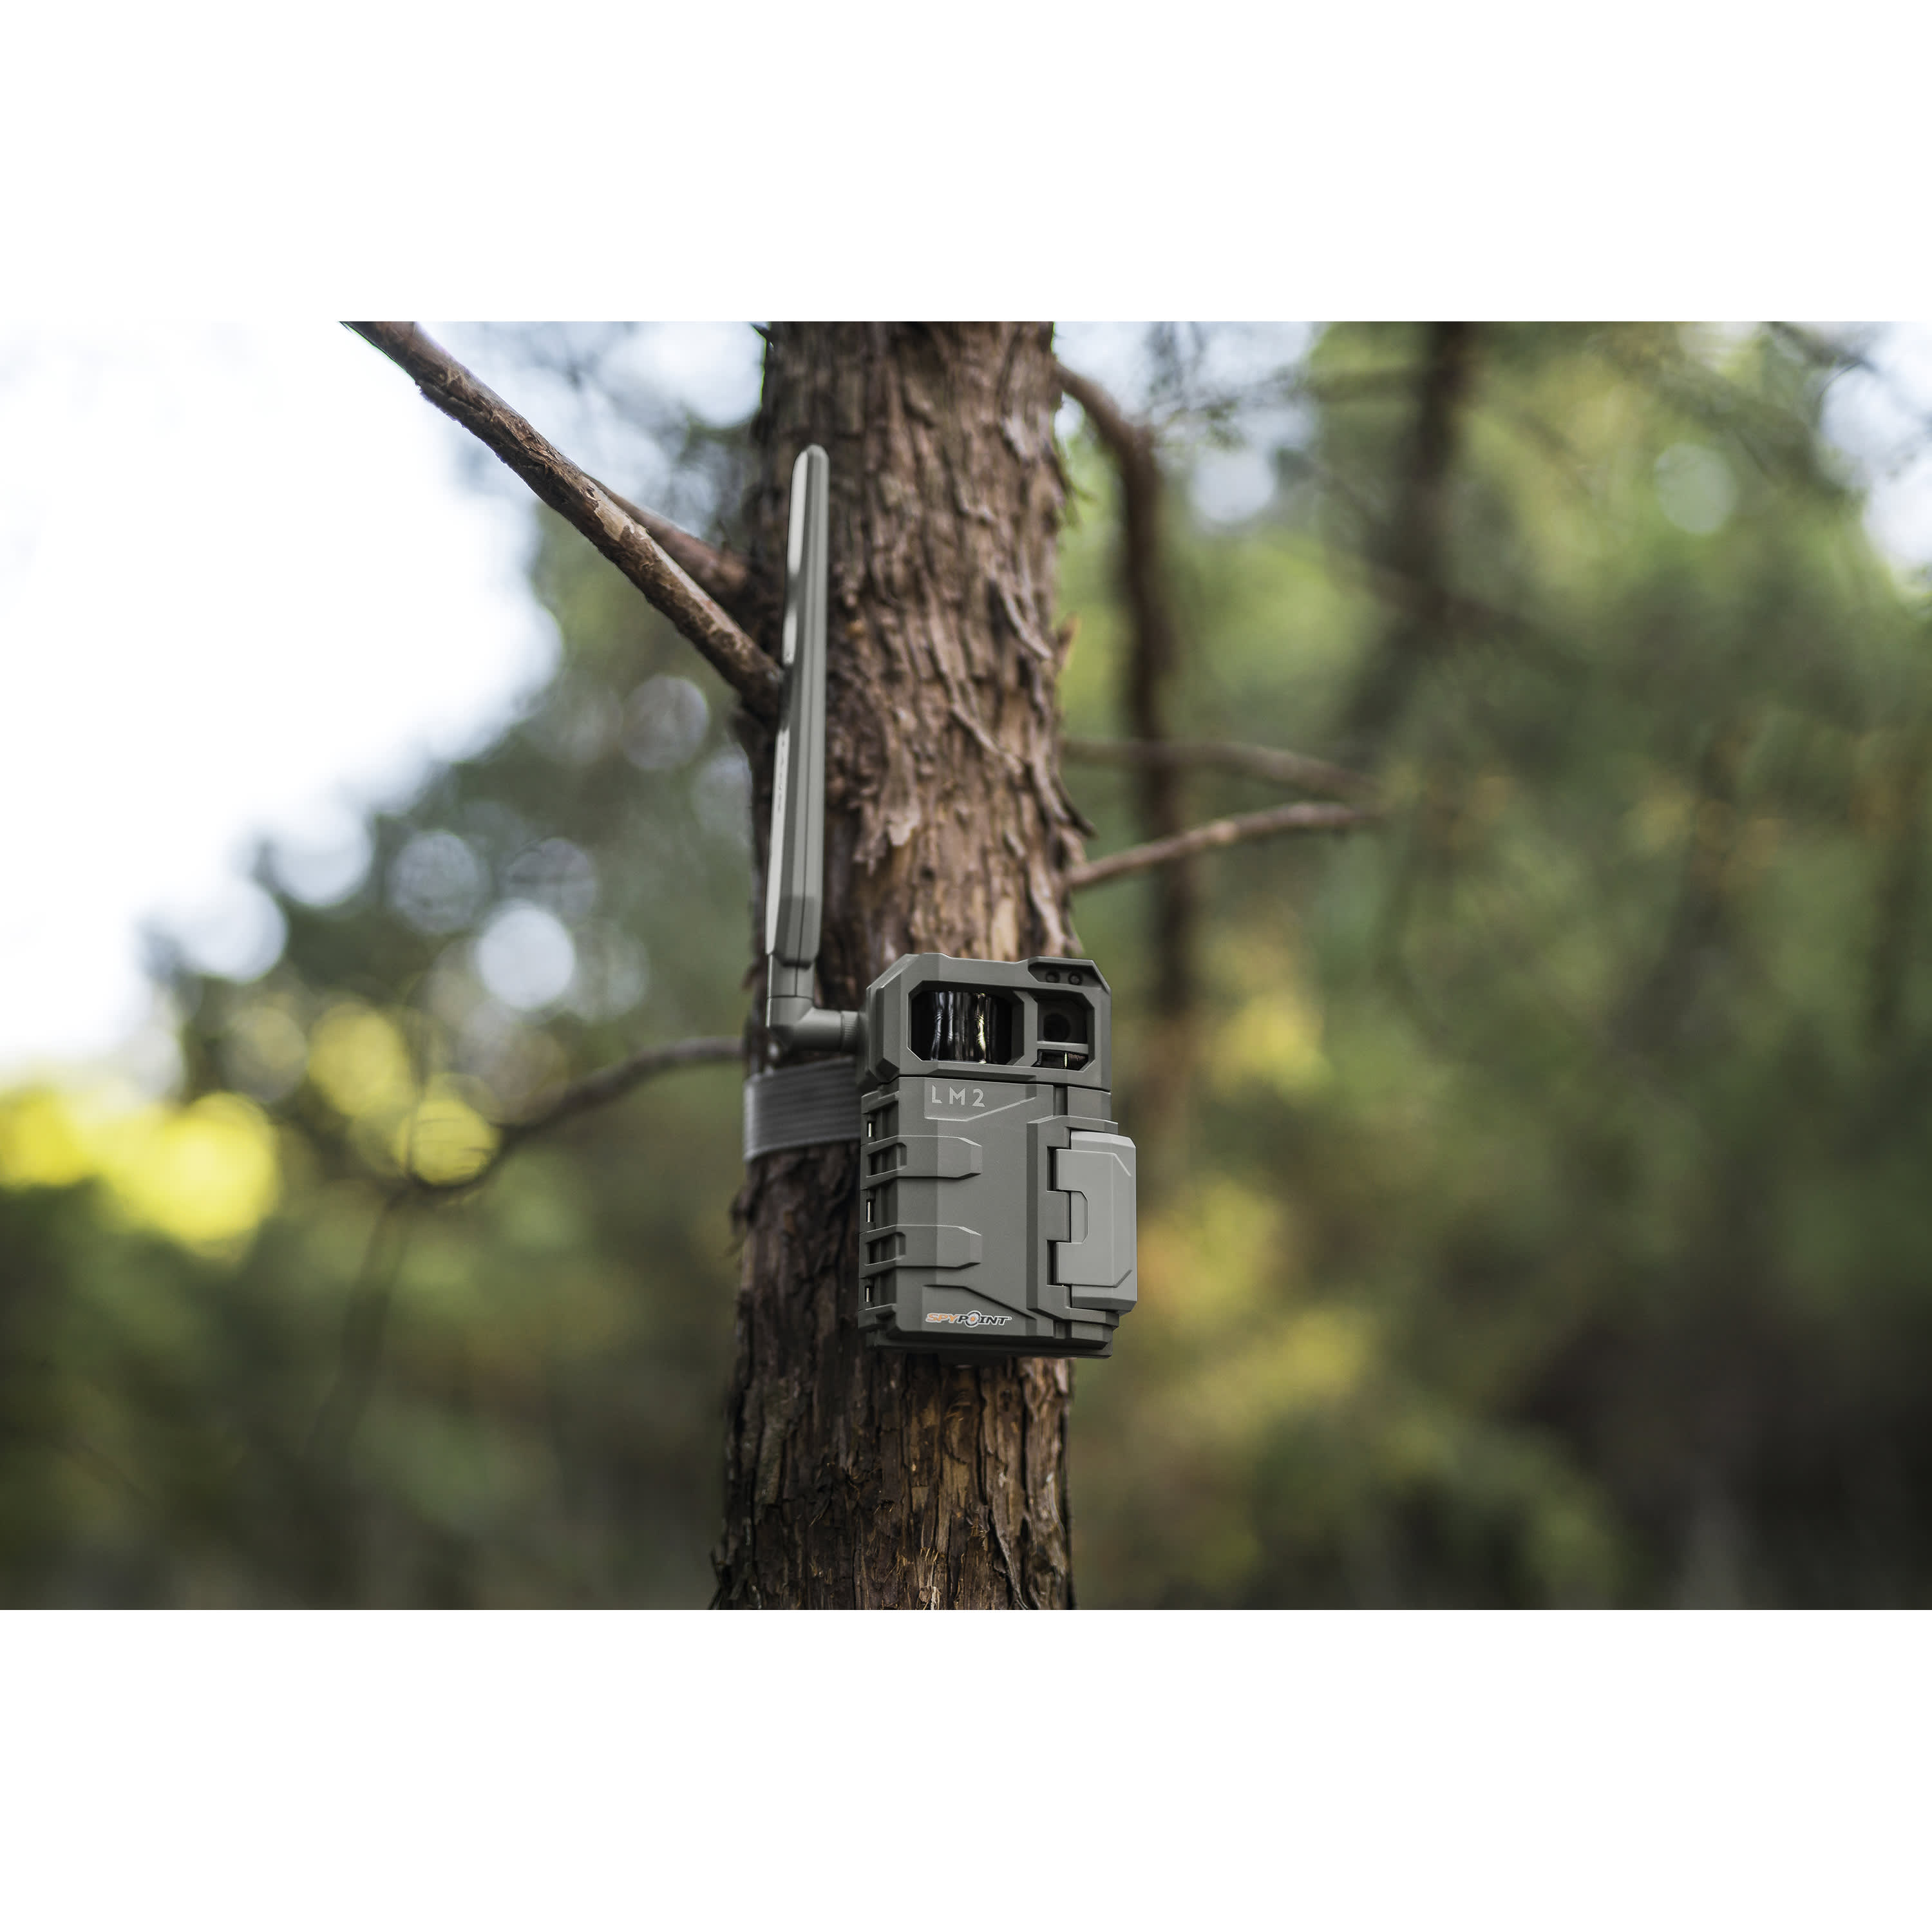 SPYPOINT® LM2 Cellular Trail Camera – Twin Pack